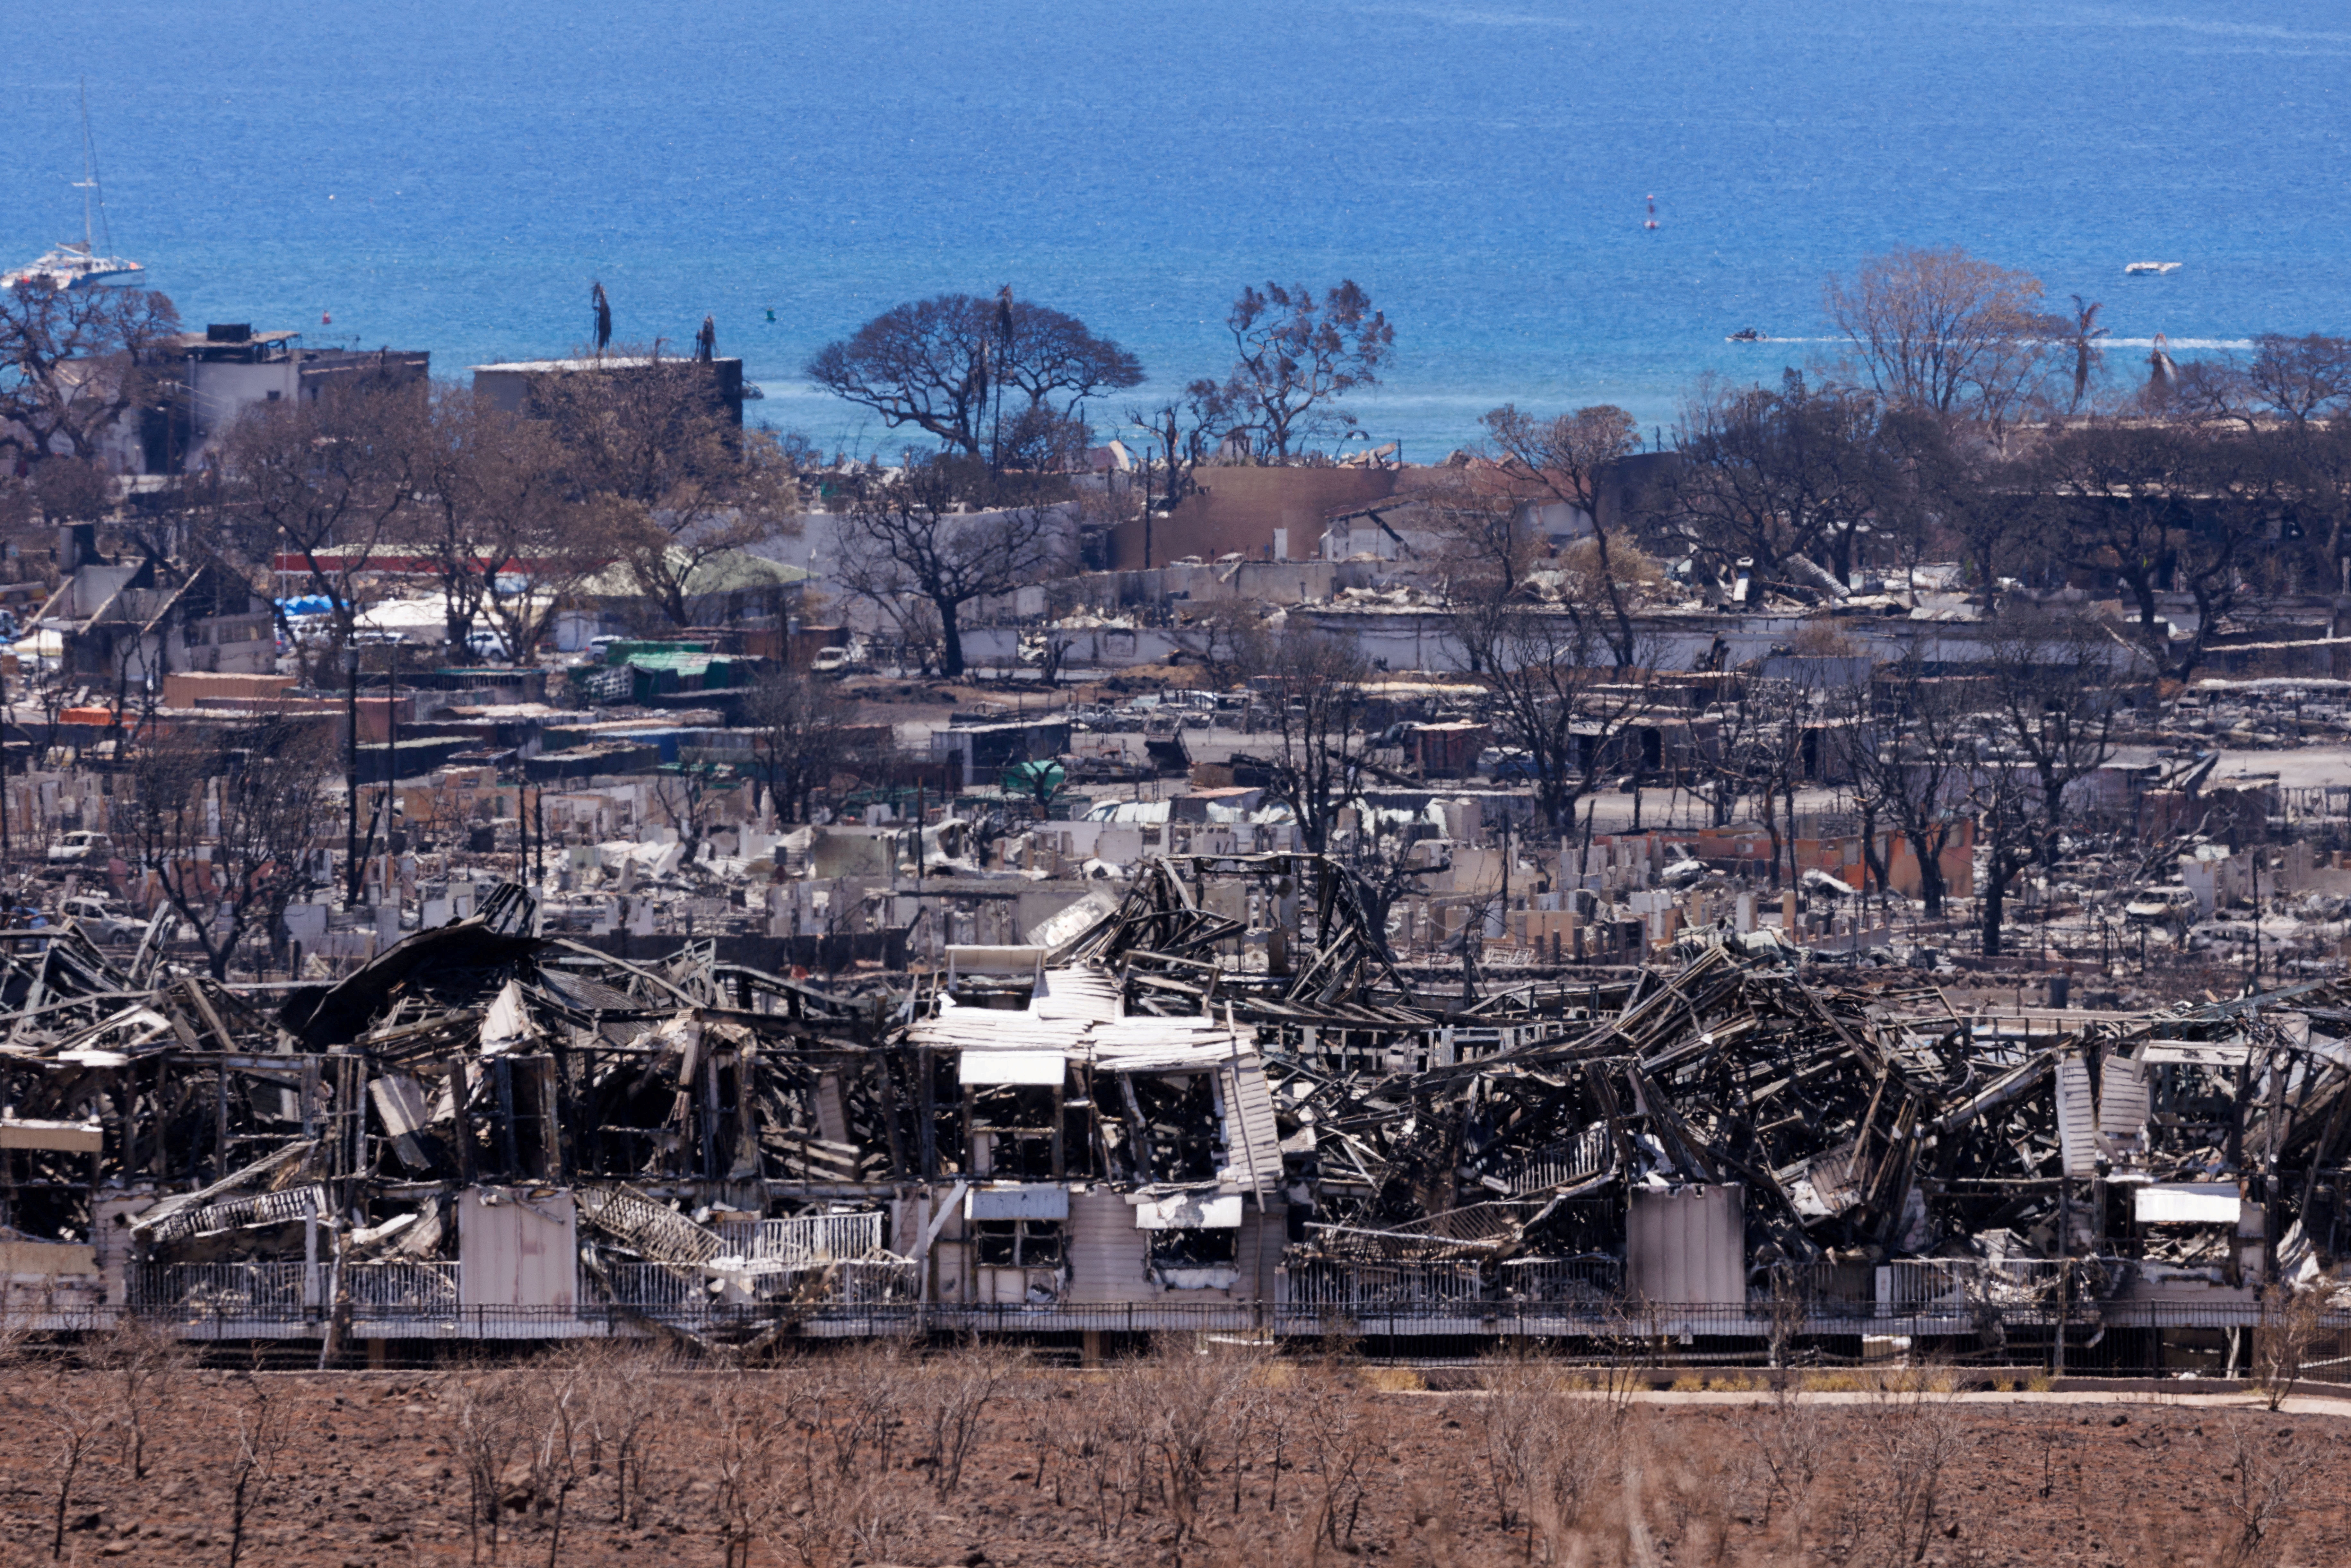 Bill Gates, laser beams & more: Round-up of false claims linked to Hawaii wildfire